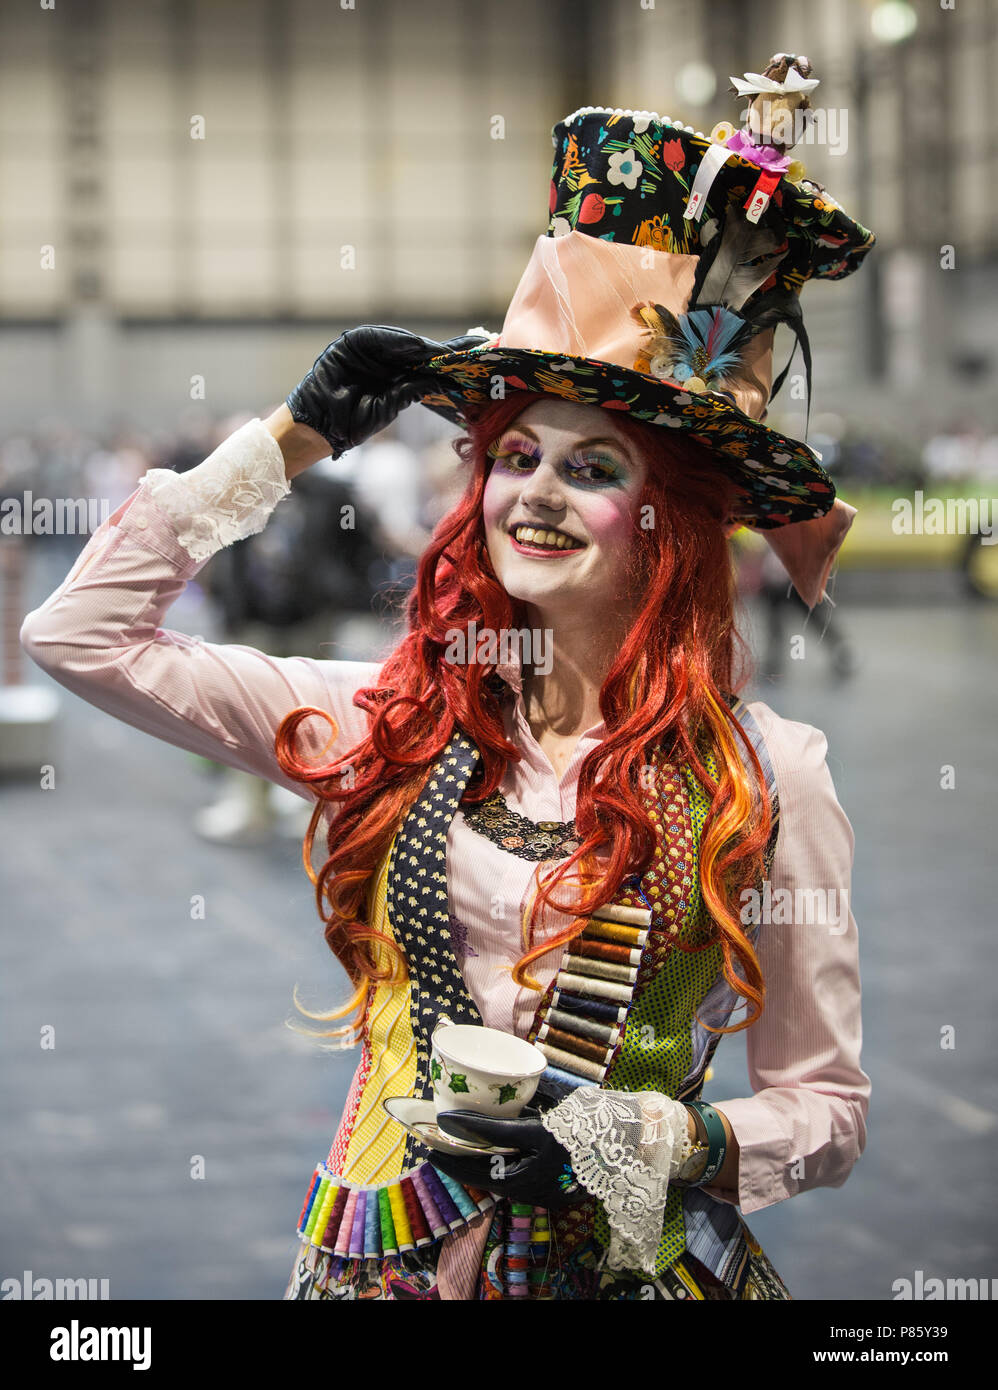 NEC, Brirmingham, UK - June 2, 2018. A girl cosplayer dressed as the Mad Hatter tea party from Alice In Wonderland at a  Collectormania comic con Stock Photo